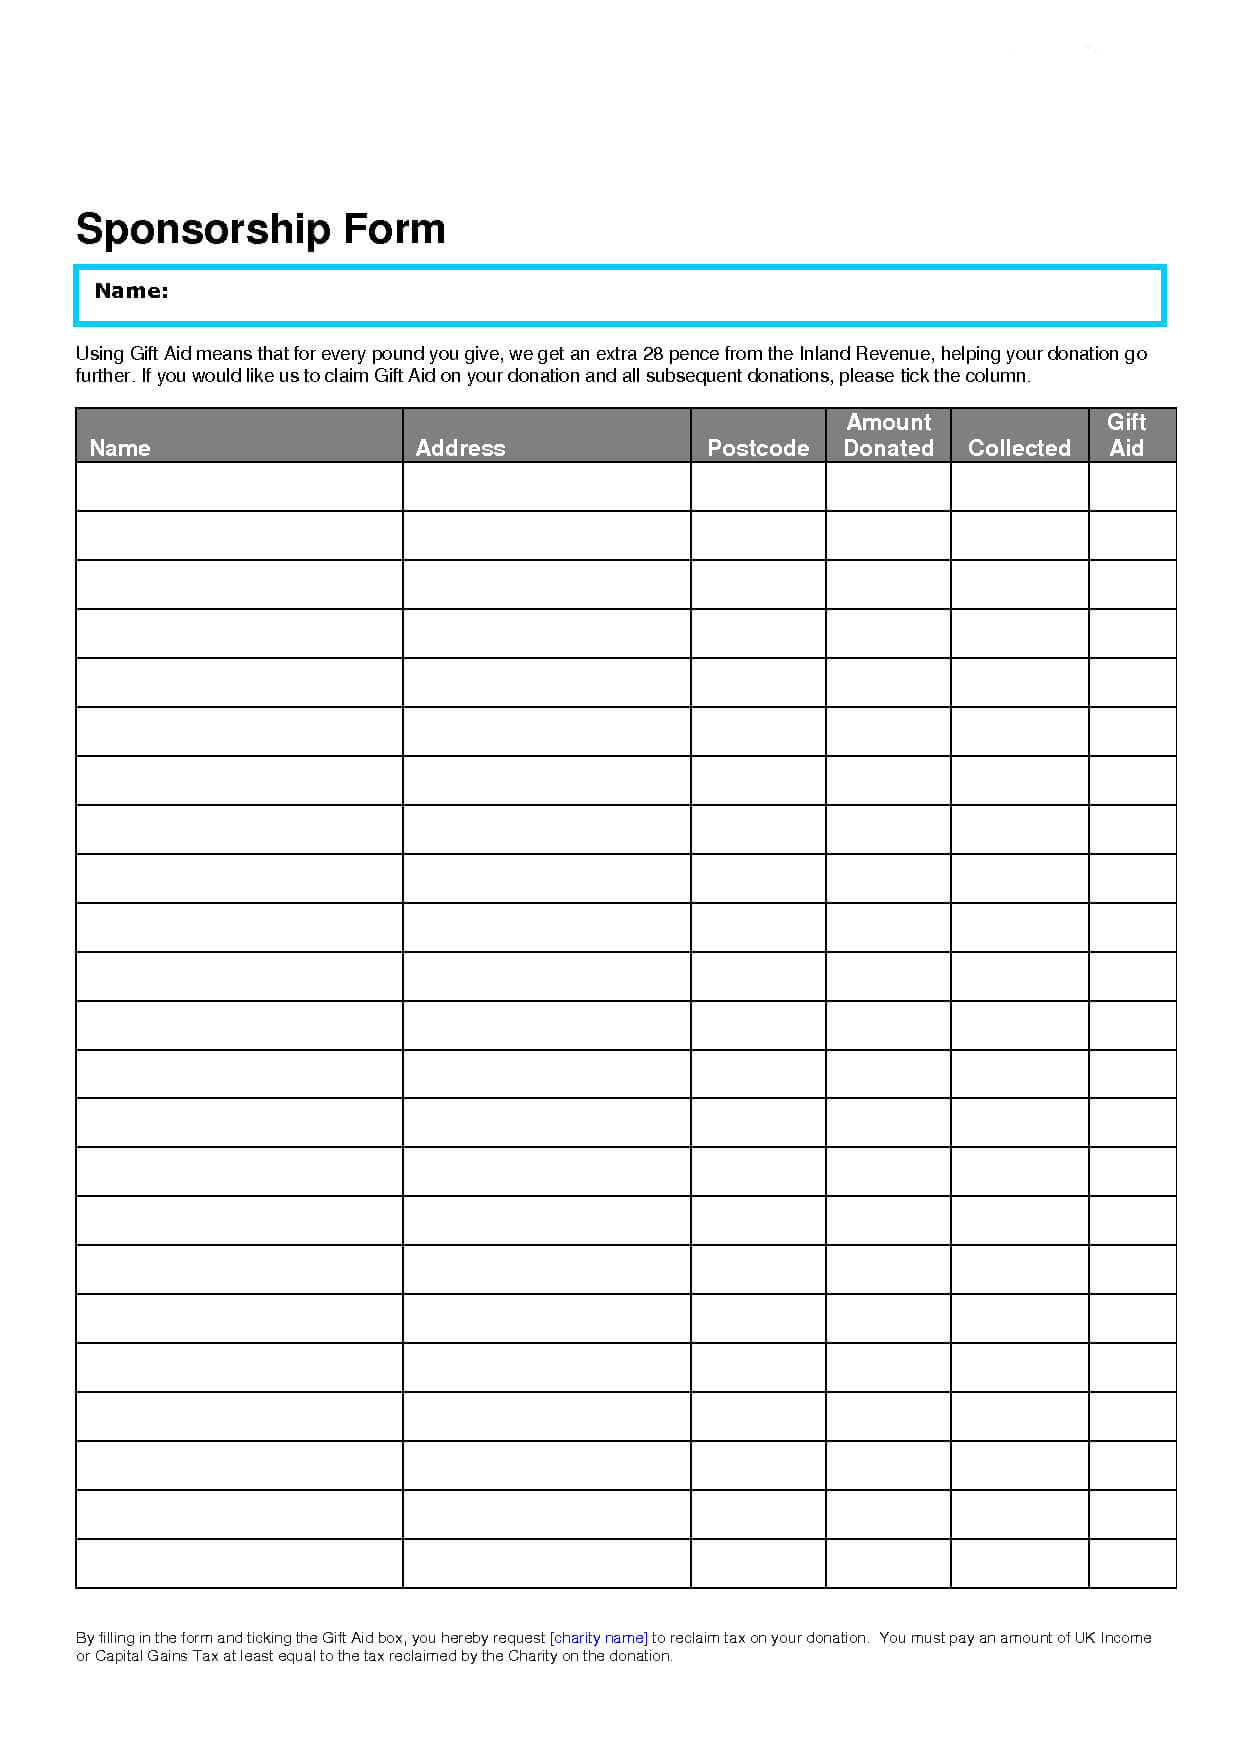 016 Sponsorship Form Pdf Samples Template Ideas Fundraiser With Blank Sponsor Form Template Free